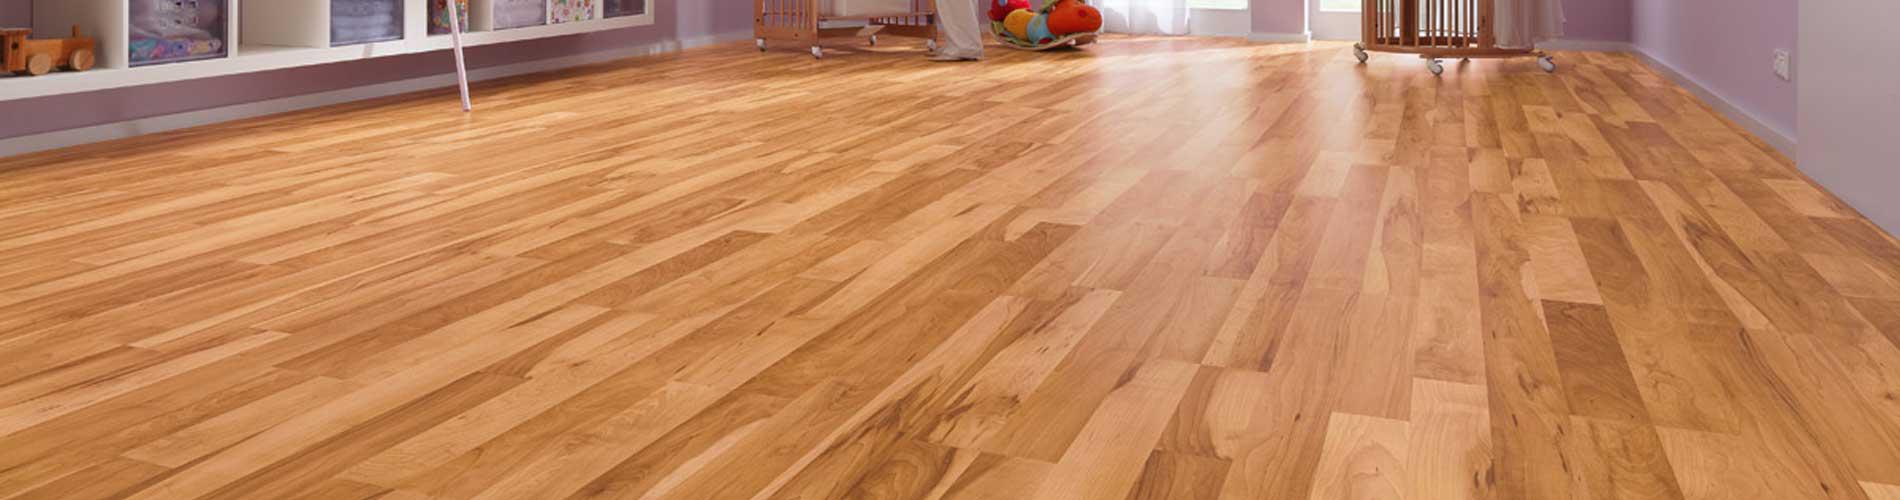 Finishing/Sealing Your Floor: Preserving and Enhancing the Beauty